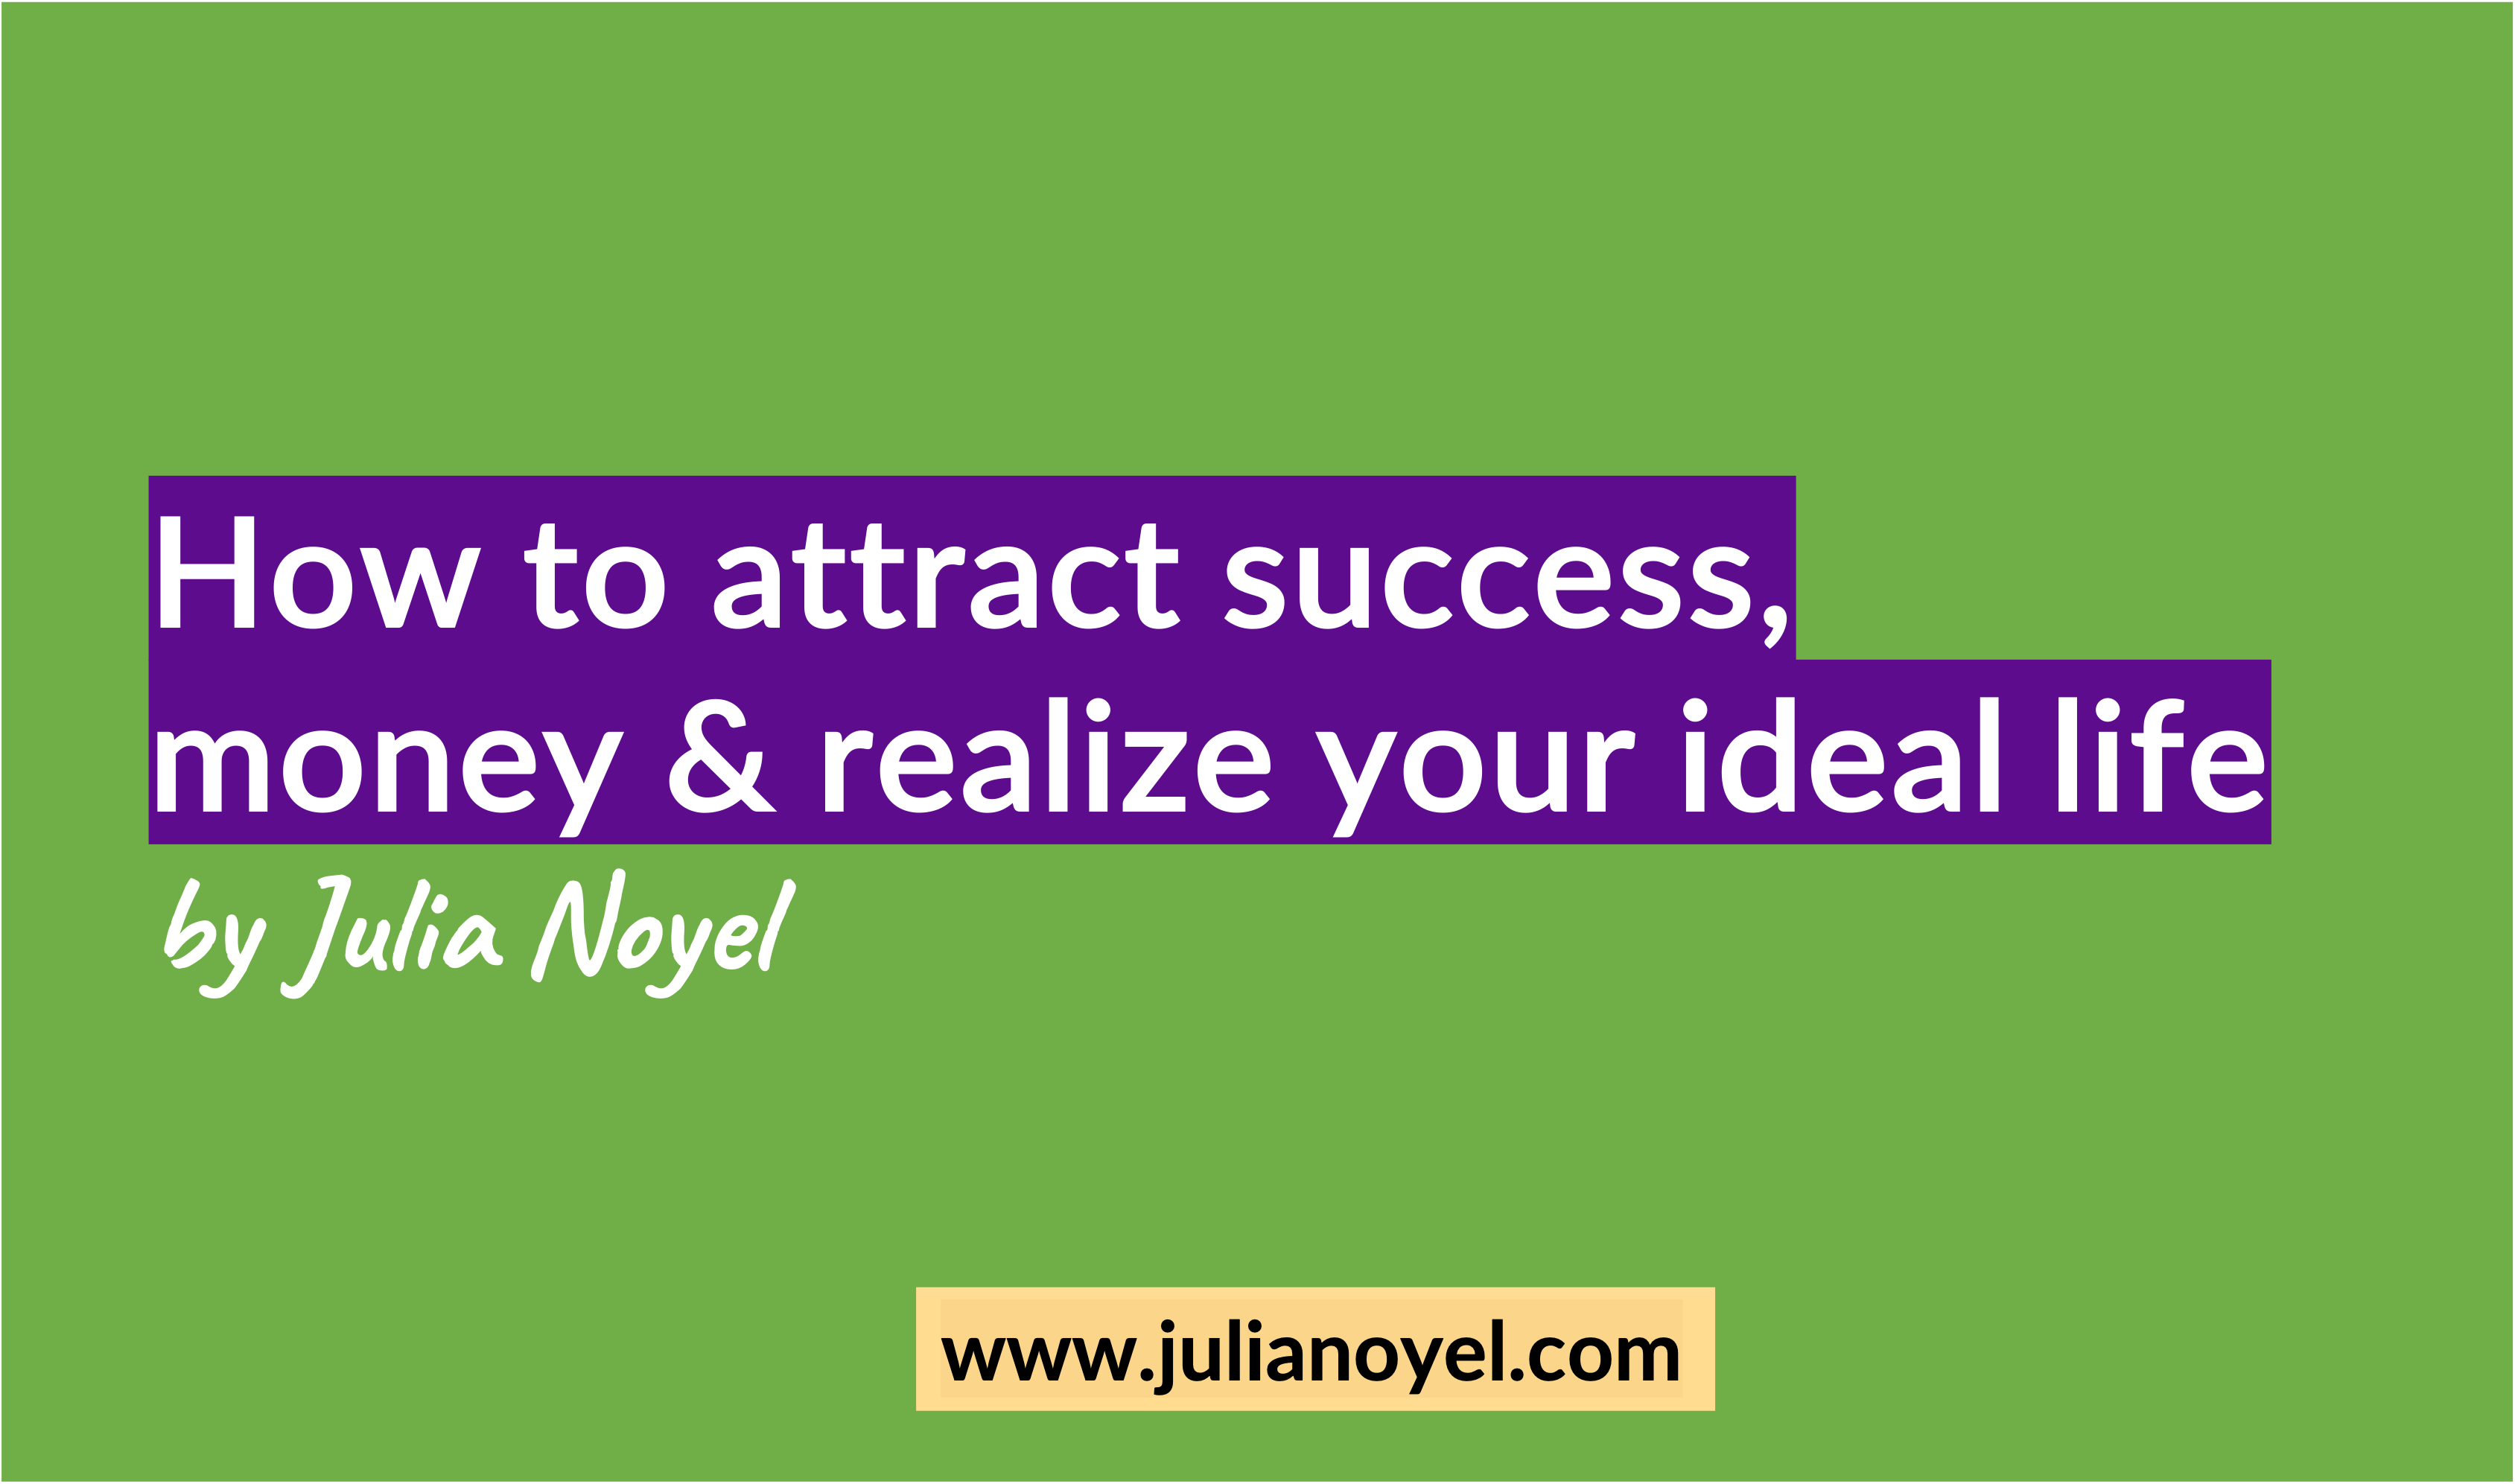 How to attract success, money & realize your ideal life by Julia Noyel